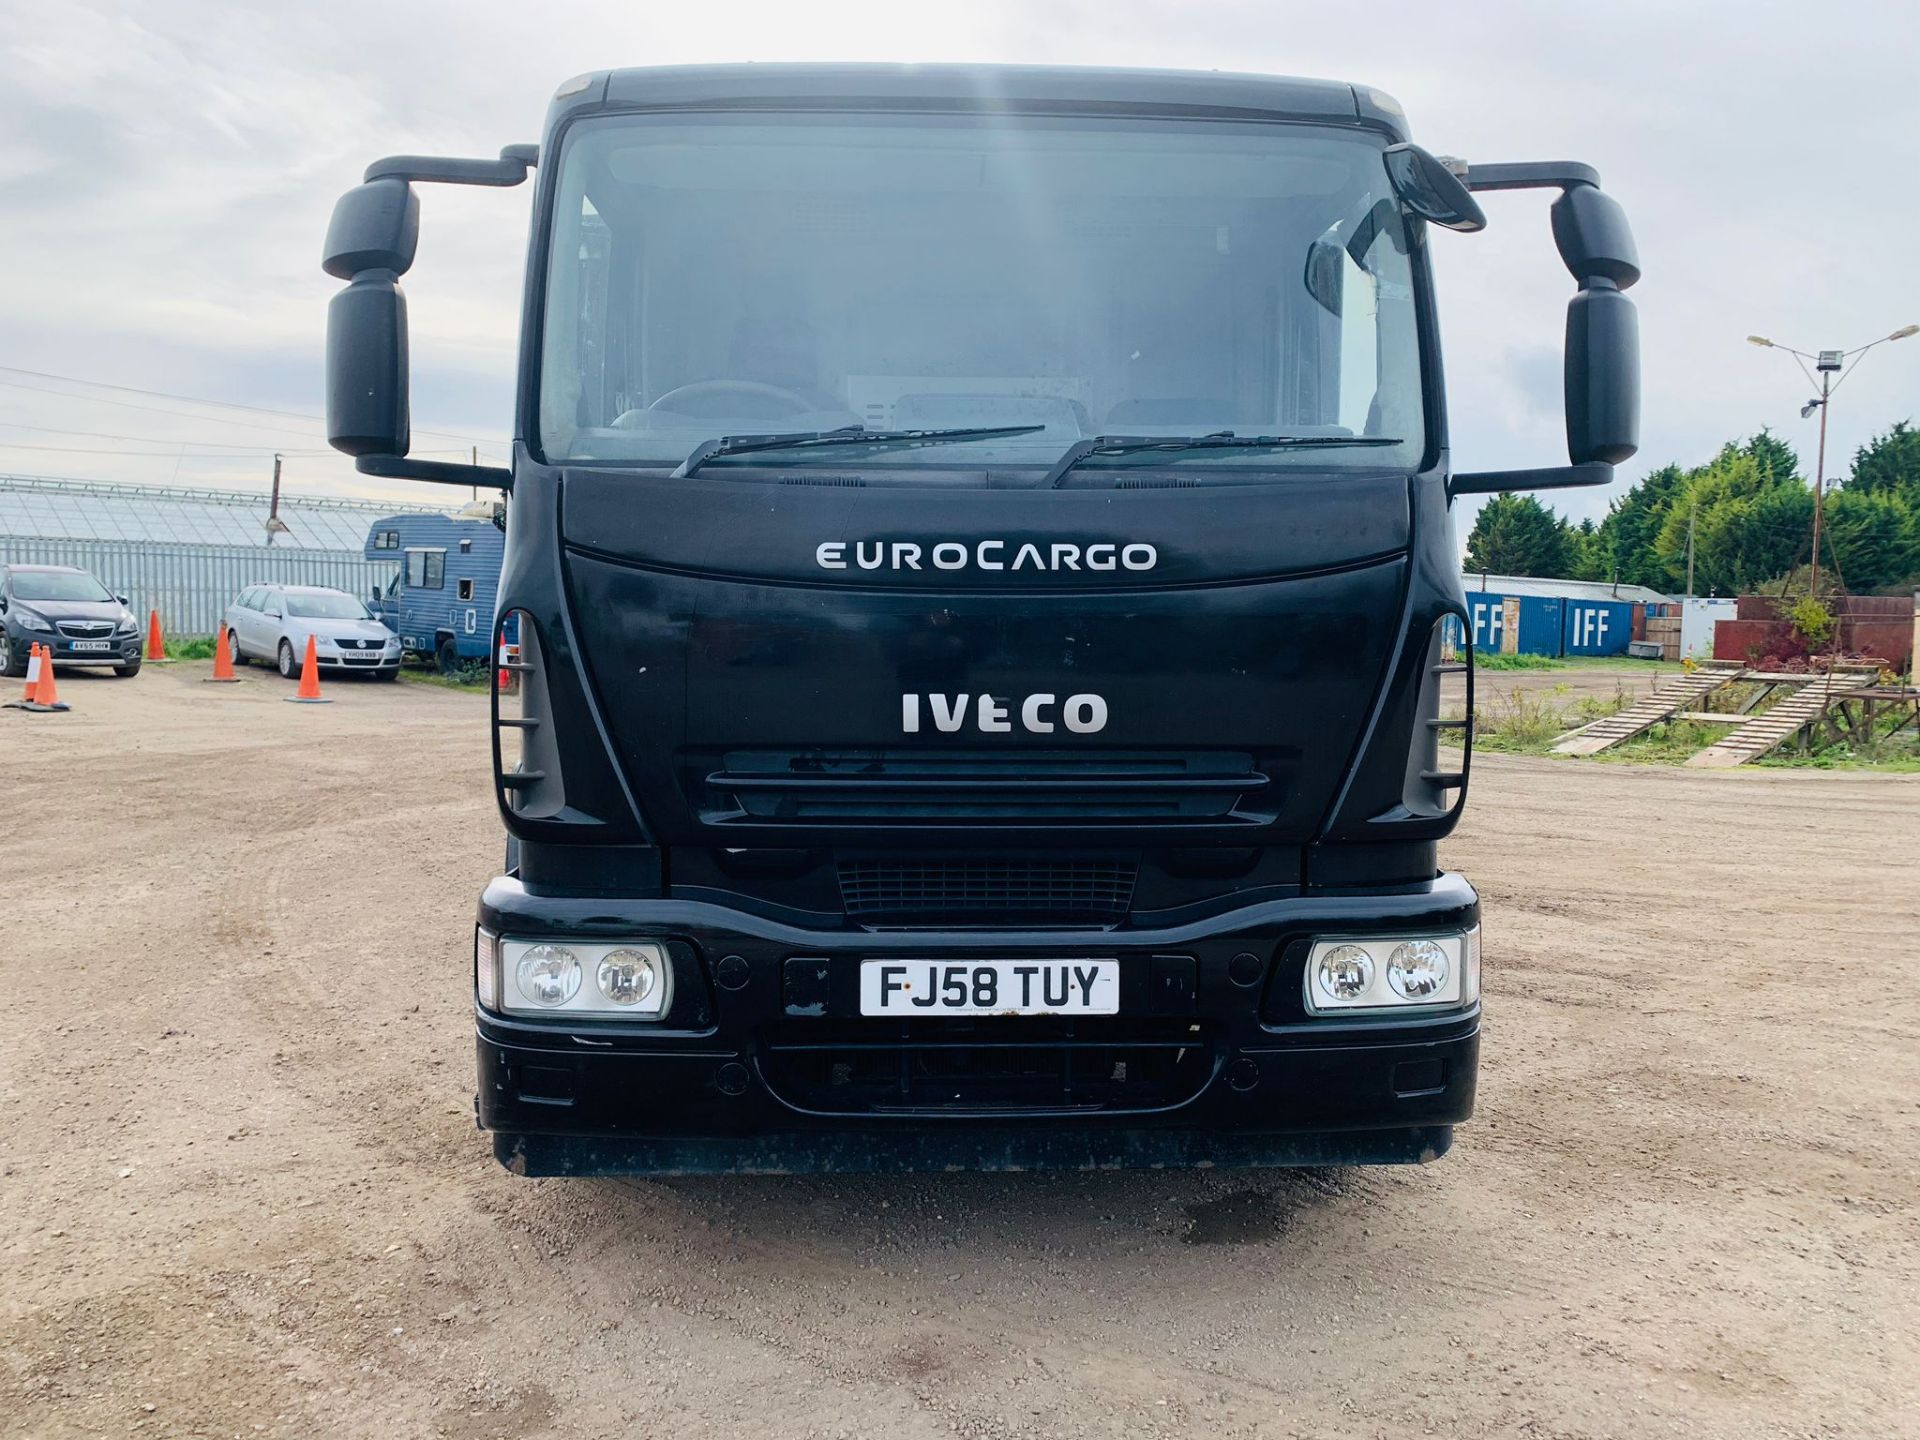 Iveco Eurocargo 180E25 - 2009 Year - 18 Tonne - 4x2 - Day Cab Truck - Image 3 of 11